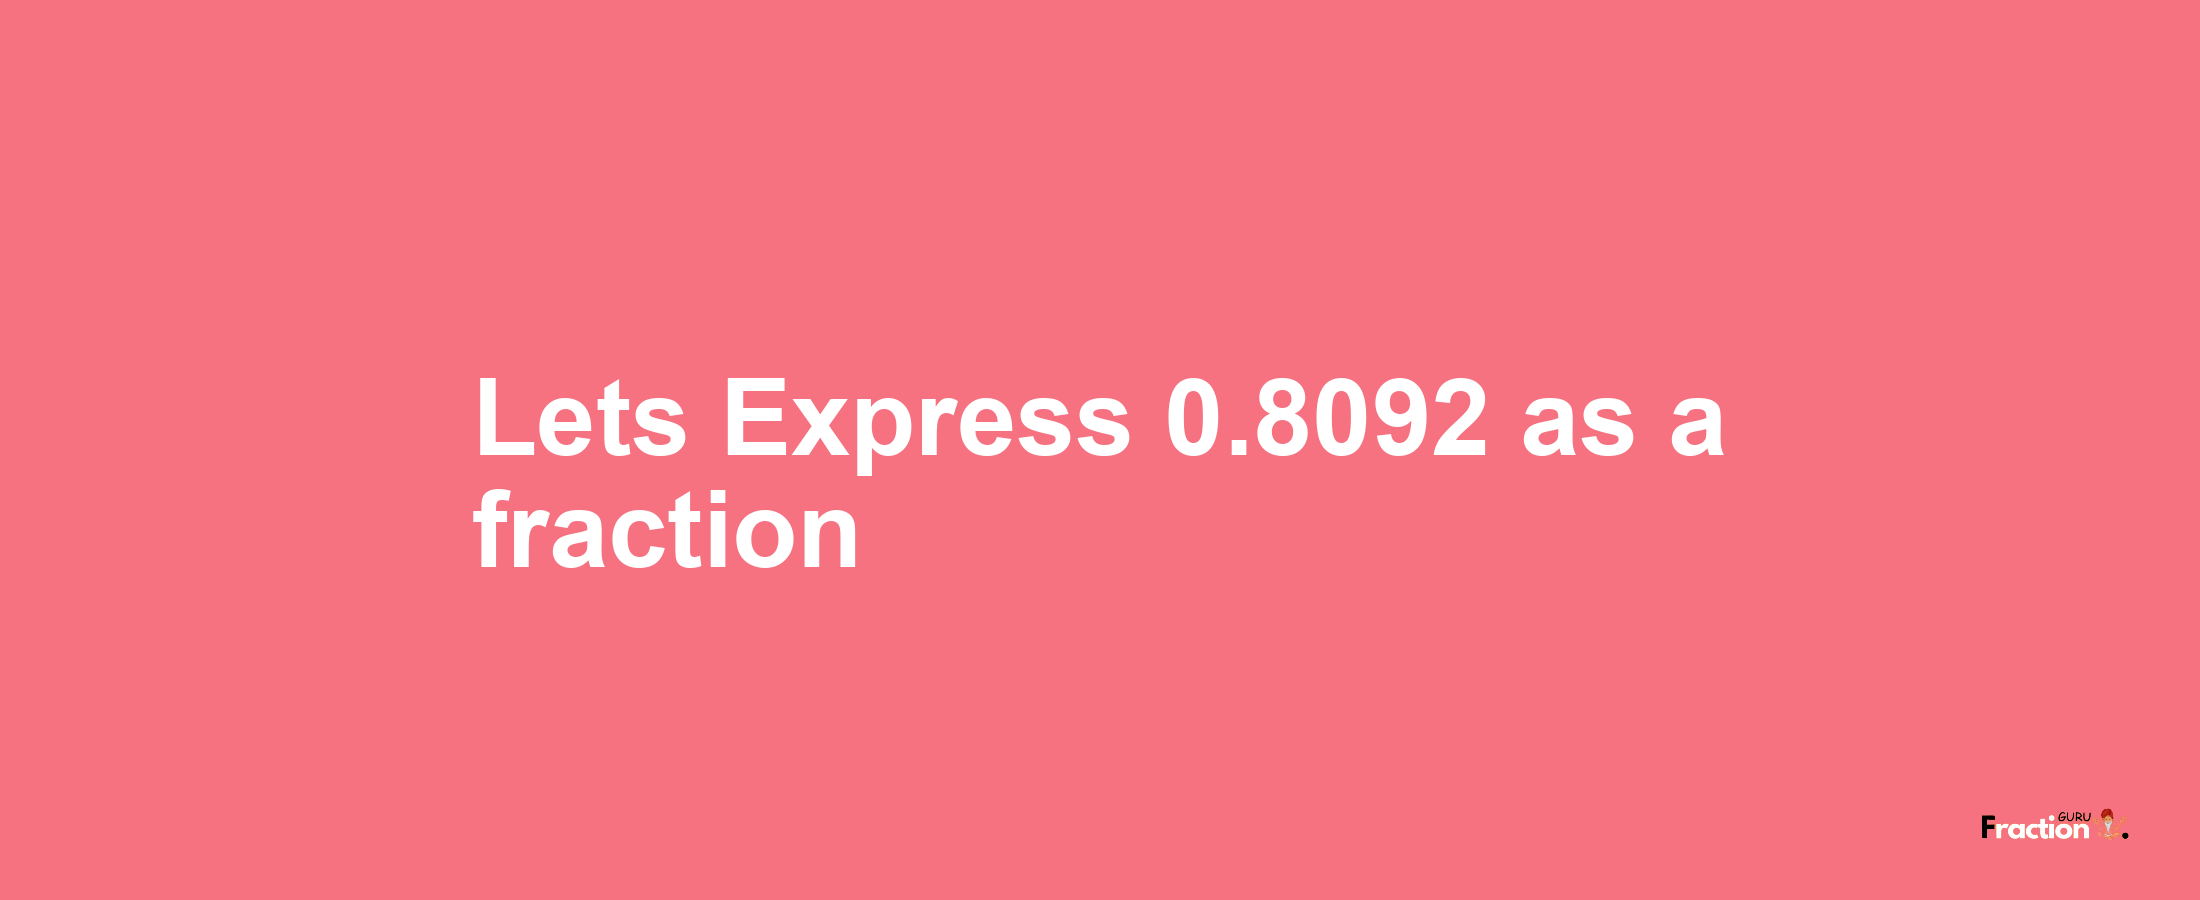 Lets Express 0.8092 as afraction